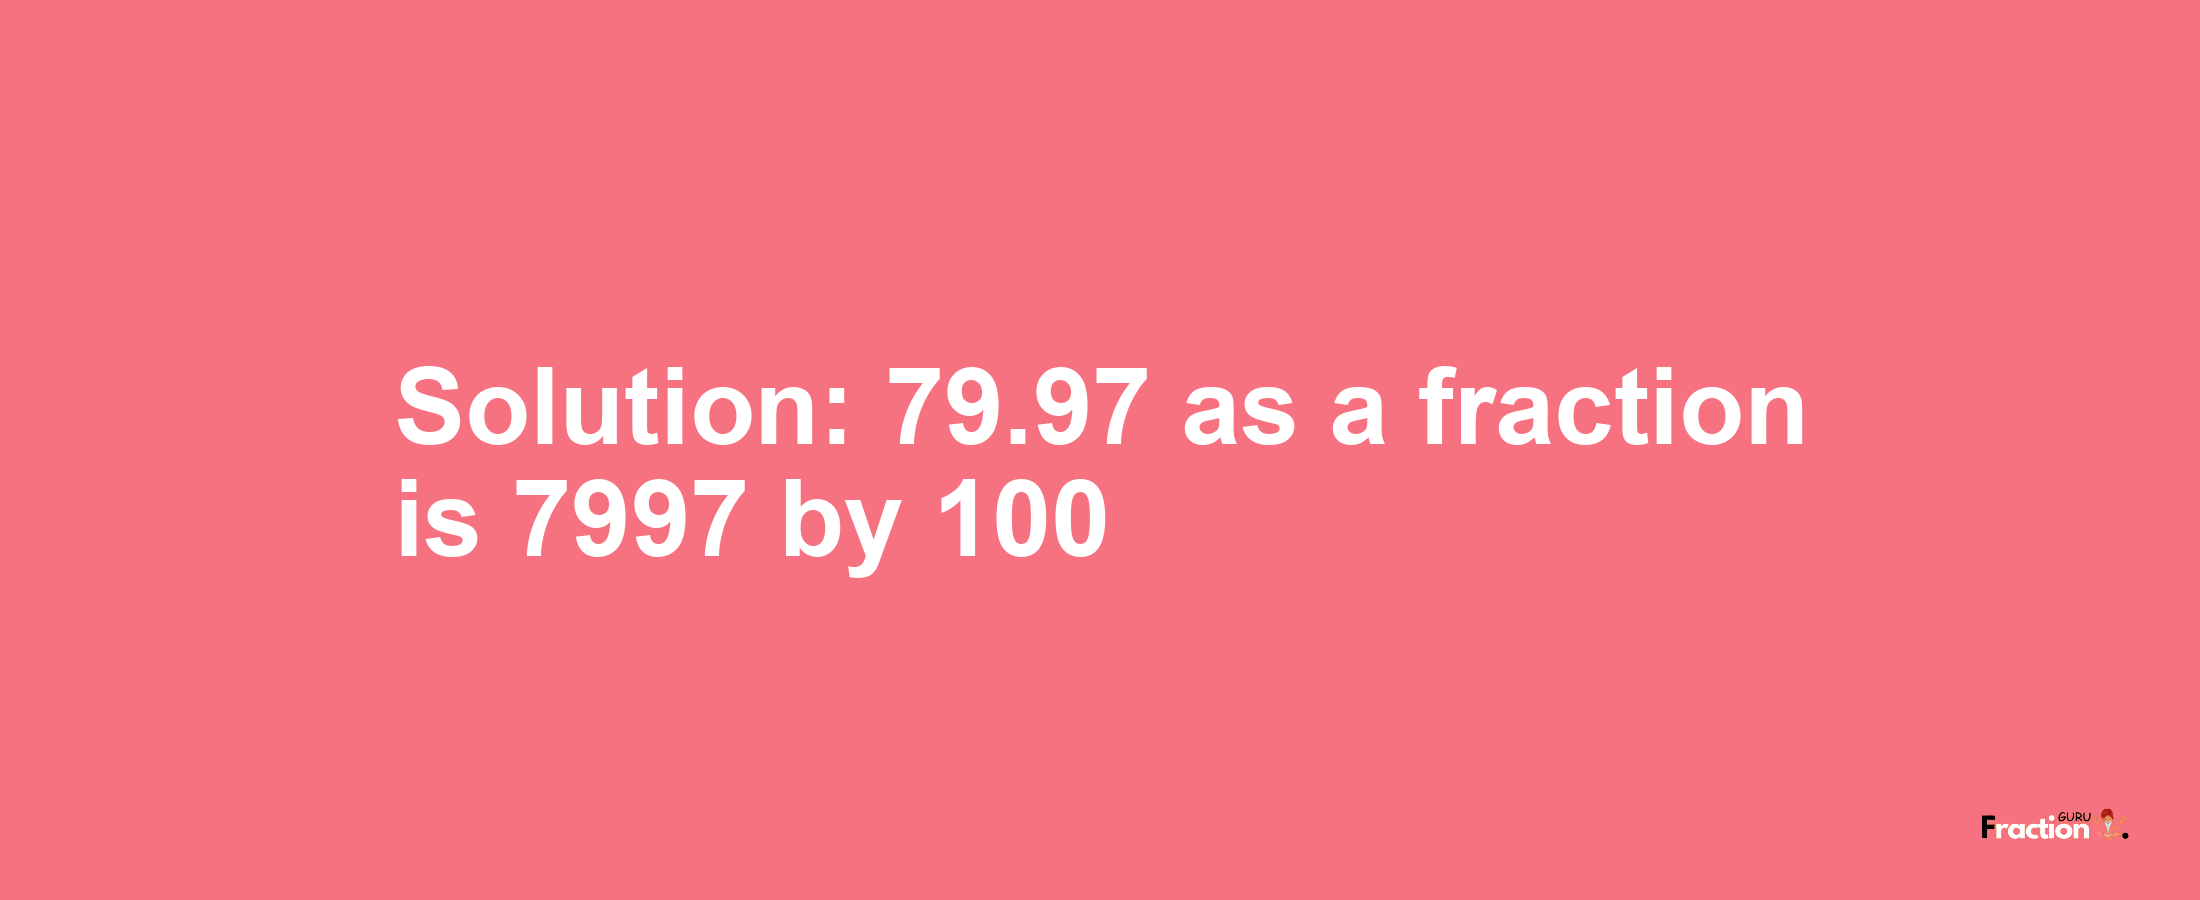 Solution:79.97 as a fraction is 7997/100